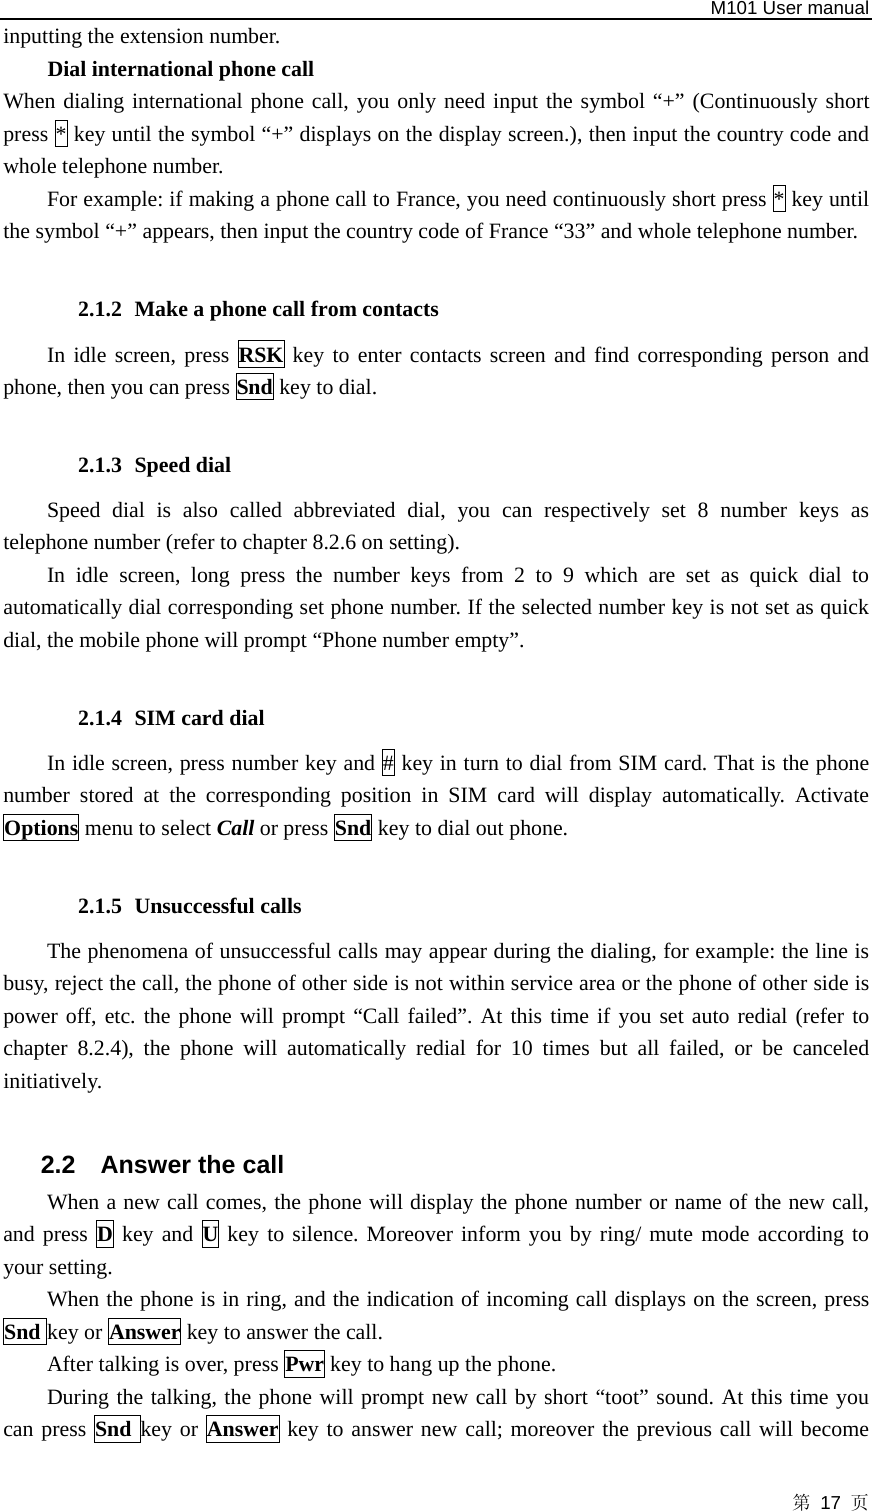   M101 User manual 第 17 页 inputting the extension number. Dial international phone call   When dialing international phone call, you only need input the symbol “+” (Continuously short press * key until the symbol “+” displays on the display screen.), then input the country code and whole telephone number. For example: if making a phone call to France, you need continuously short press * key until the symbol “+” appears, then input the country code of France “33” and whole telephone number.  2.1.2 Make a phone call from contacts In idle screen, press RSK key to enter contacts screen and find corresponding person and phone, then you can press Snd key to dial.  2.1.3 Speed dial Speed dial is also called abbreviated dial, you can respectively set 8 number keys as telephone number (refer to chapter 8.2.6 on setting).   In idle screen, long press the number keys from 2 to 9 which are set as quick dial to automatically dial corresponding set phone number. If the selected number key is not set as quick dial, the mobile phone will prompt “Phone number empty”.  2.1.4 SIM card dial In idle screen, press number key and # key in turn to dial from SIM card. That is the phone number stored at the corresponding position in SIM card will display automatically. Activate Options menu to select Call or press Snd key to dial out phone.  2.1.5 Unsuccessful calls The phenomena of unsuccessful calls may appear during the dialing, for example: the line is busy, reject the call, the phone of other side is not within service area or the phone of other side is power off, etc. the phone will prompt “Call failed”. At this time if you set auto redial (refer to chapter 8.2.4), the phone will automatically redial for 10 times but all failed, or be canceled initiatively.  2.2  Answer the call When a new call comes, the phone will display the phone number or name of the new call, and press D key and U key to silence. Moreover inform you by ring/ mute mode according to your setting.   When the phone is in ring, and the indication of incoming call displays on the screen, press Snd key or Answer key to answer the call.   After talking is over, press Pwr key to hang up the phone.   During the talking, the phone will prompt new call by short “toot” sound. At this time you can press Snd key or Answer key to answer new call; moreover the previous call will become 